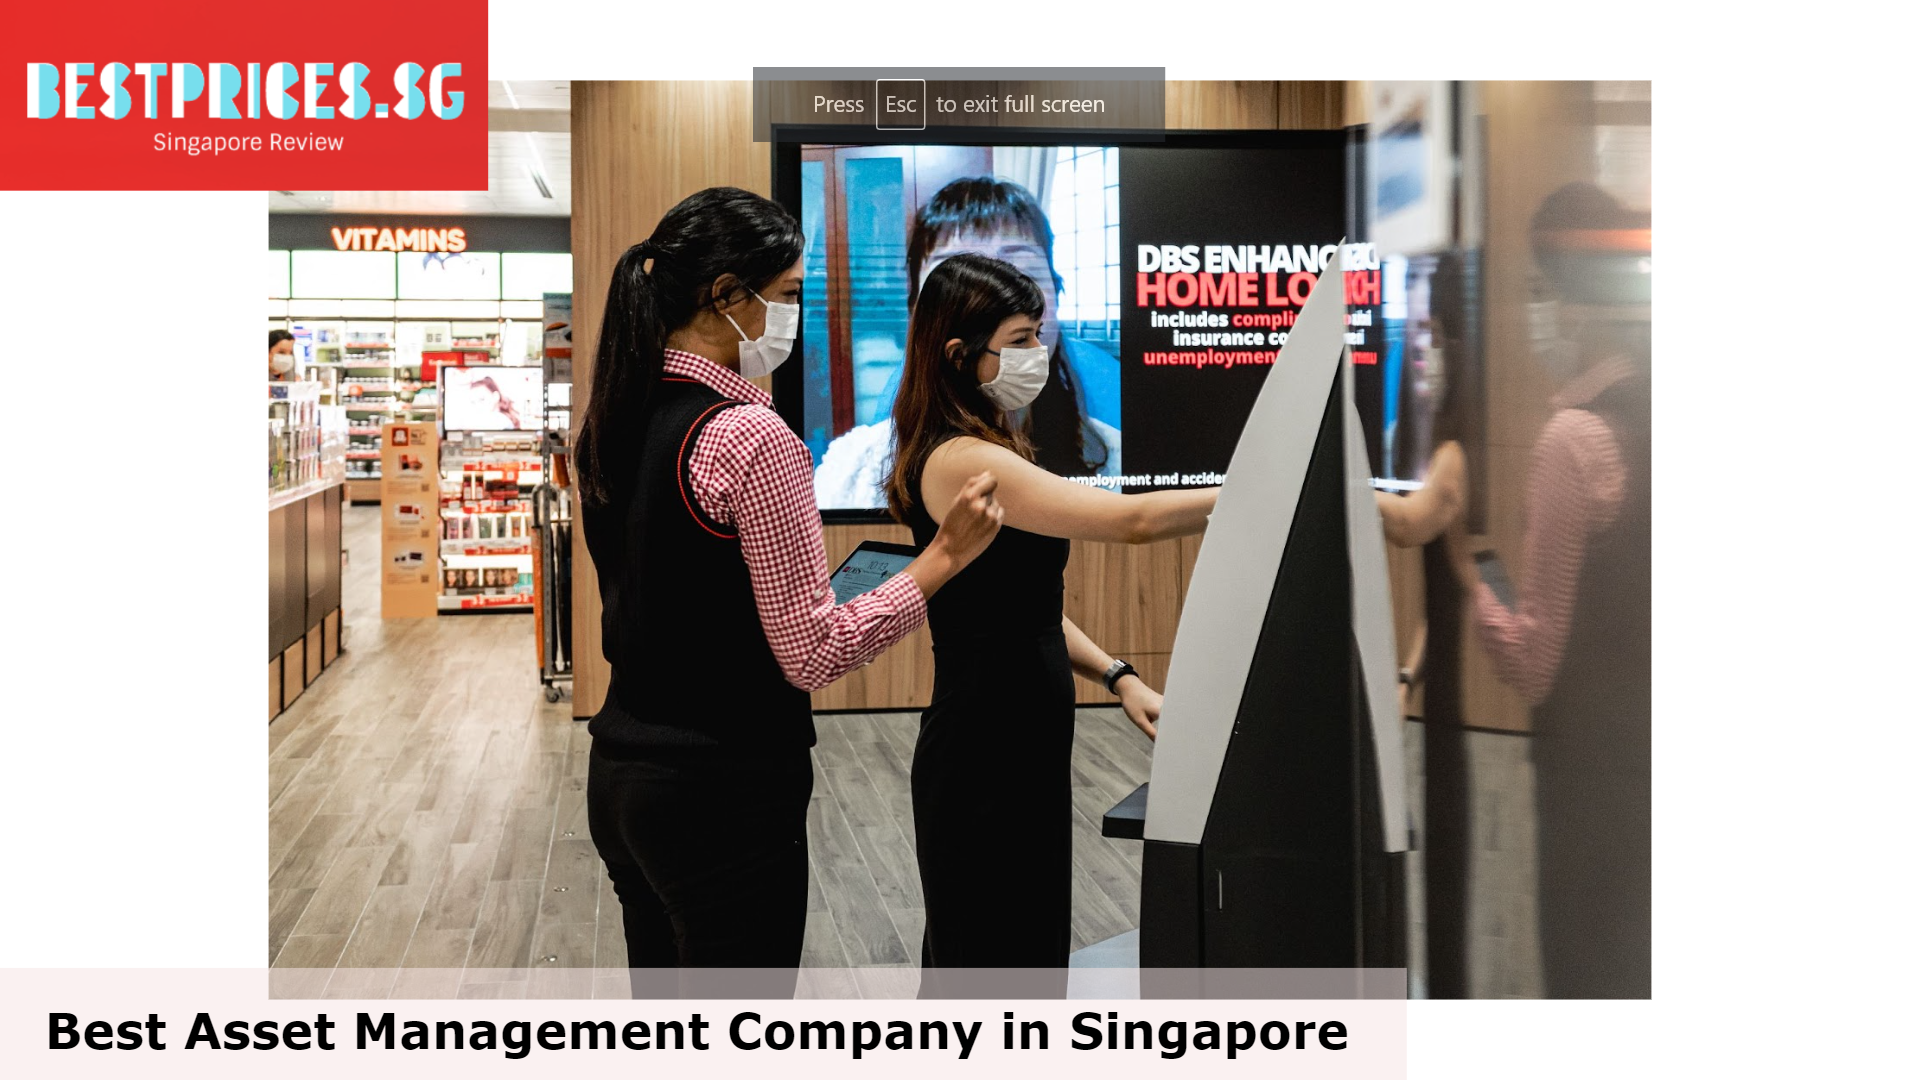 DBS Bank - Best Asset Management Company in Singapore, Asset Management Company Singapore, What does a asset management company do in Singapore?, 
Who are the big 3 asset managers in Singapore?, 
How large is Singapore's asset management industry?, 
What do asset management companies charge in Singapore?, list of asset management companies in singapore, top 10 asset management companies in singapore, top asset management firms singapore, singapore asset management industry 2022, boutique asset management firms singapore, singapore asset management jobs, mas asset management, Who is the best fund manager in Asia?, How many asset managers are there in Singapore?, oes asset management pay well?, How much does asset management cost?, What does an asset manager do?, 